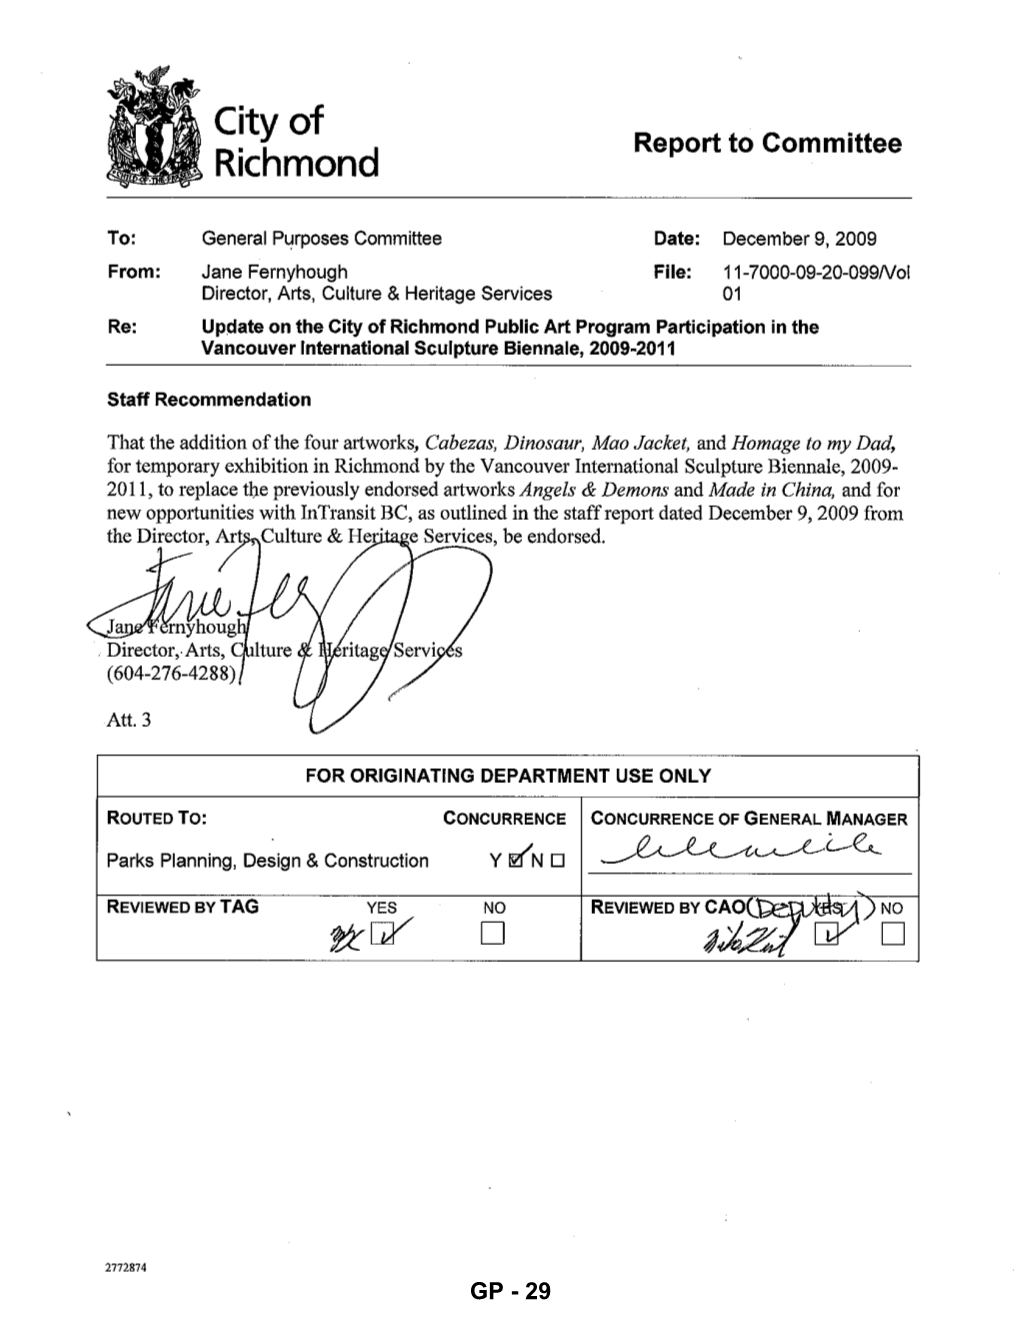 Update on the City of Richmond Public Art Program Participation In